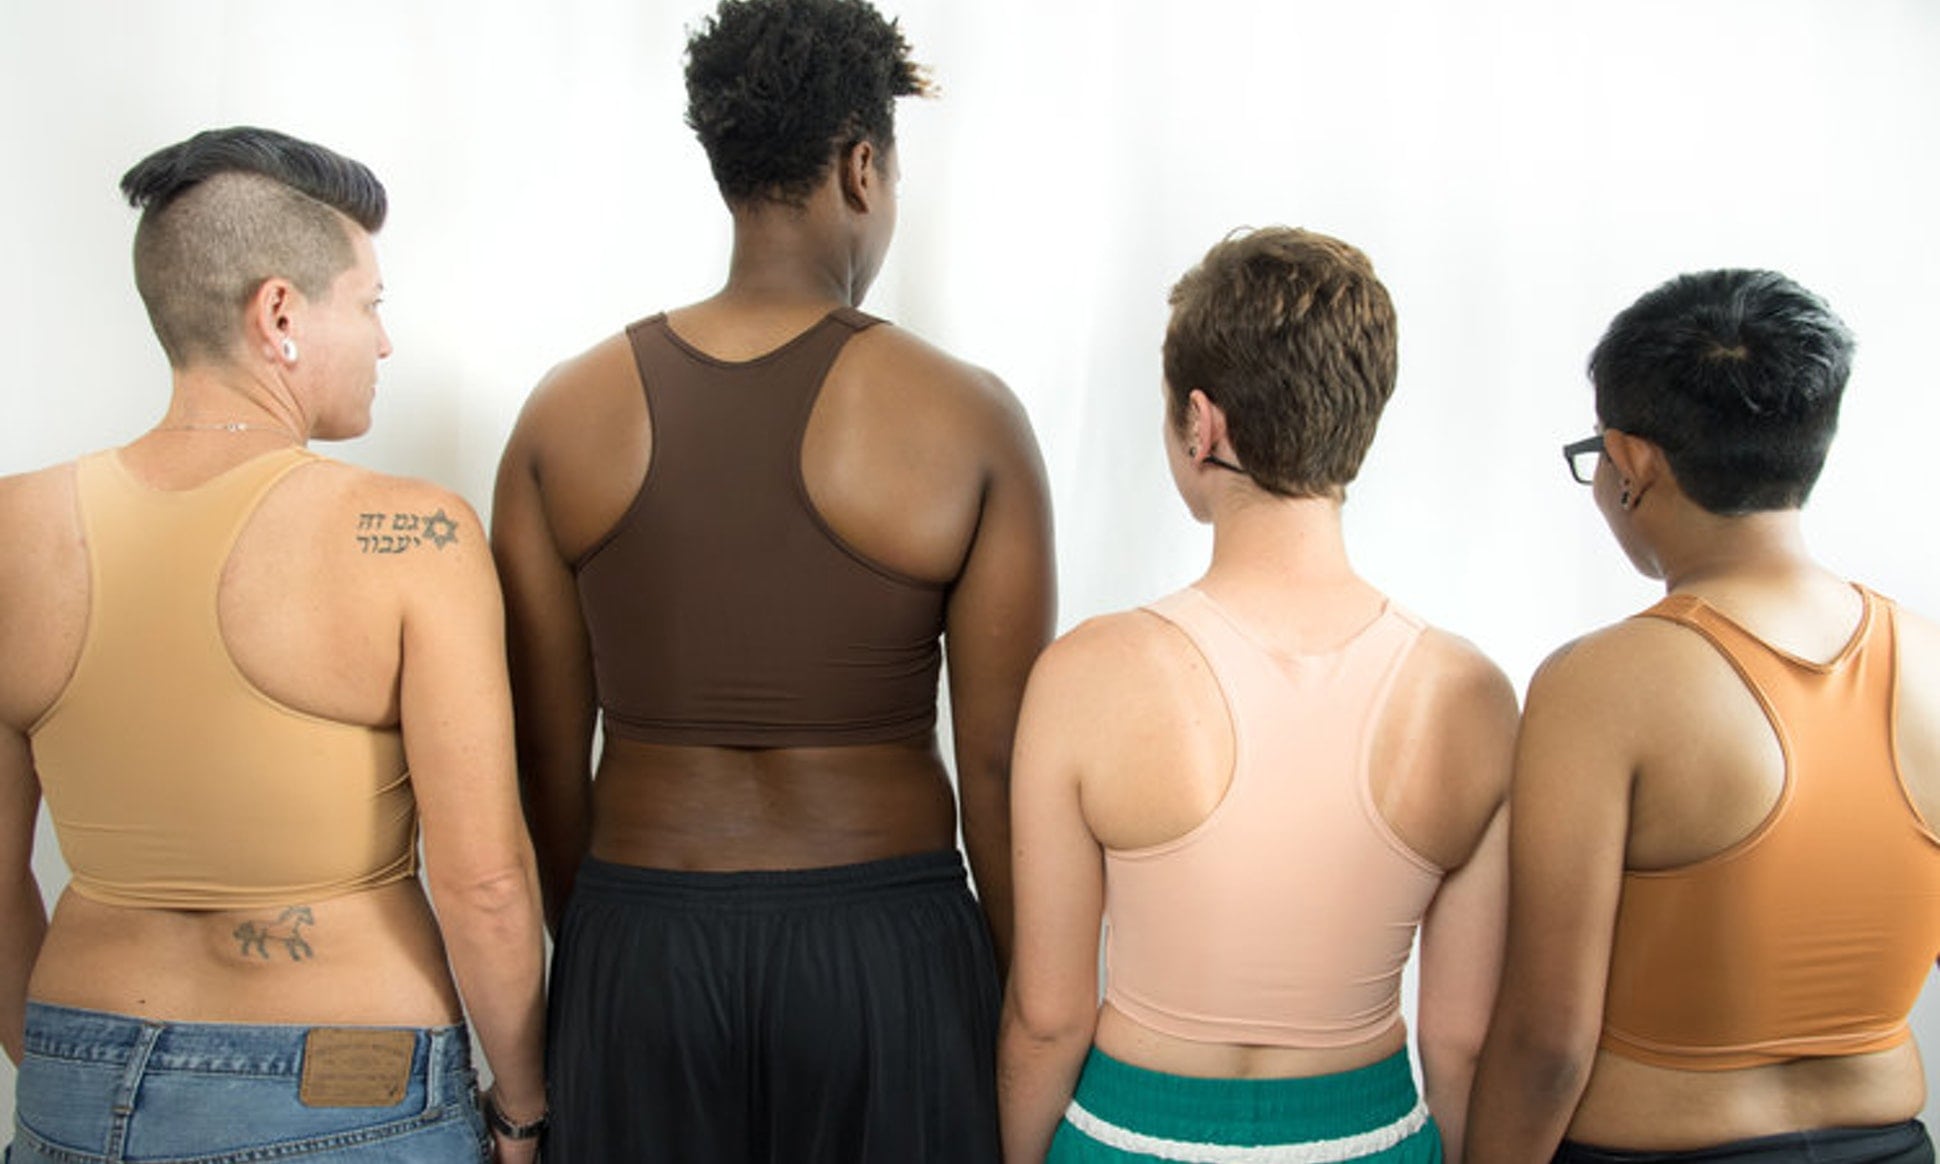 four people with different skin tones and gender identifications with their backs to you wearing skin-tone color binders